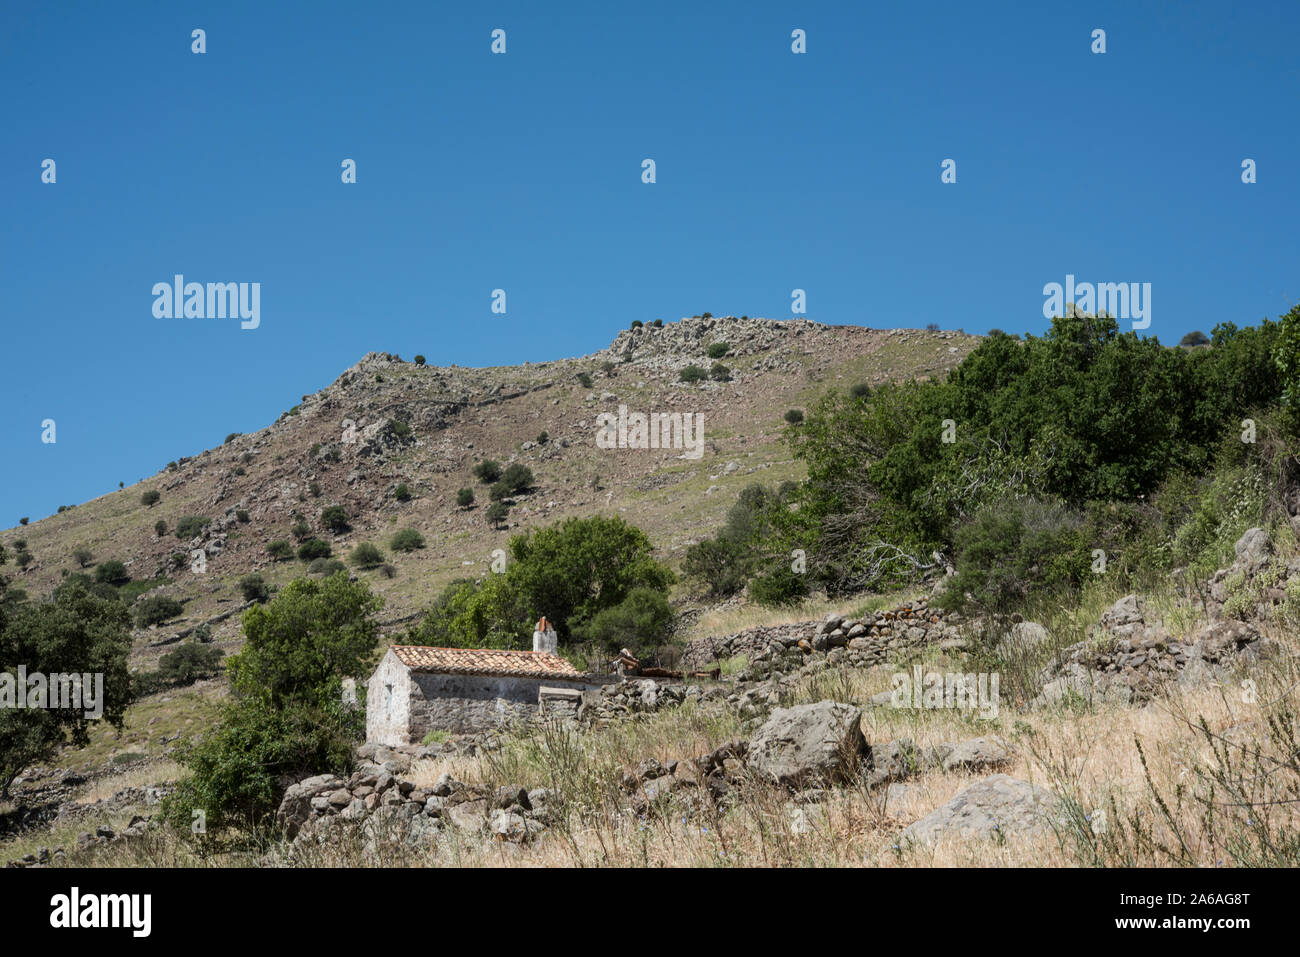 Small traditional house near Agra, Lesbos, Greece. Stock Photo